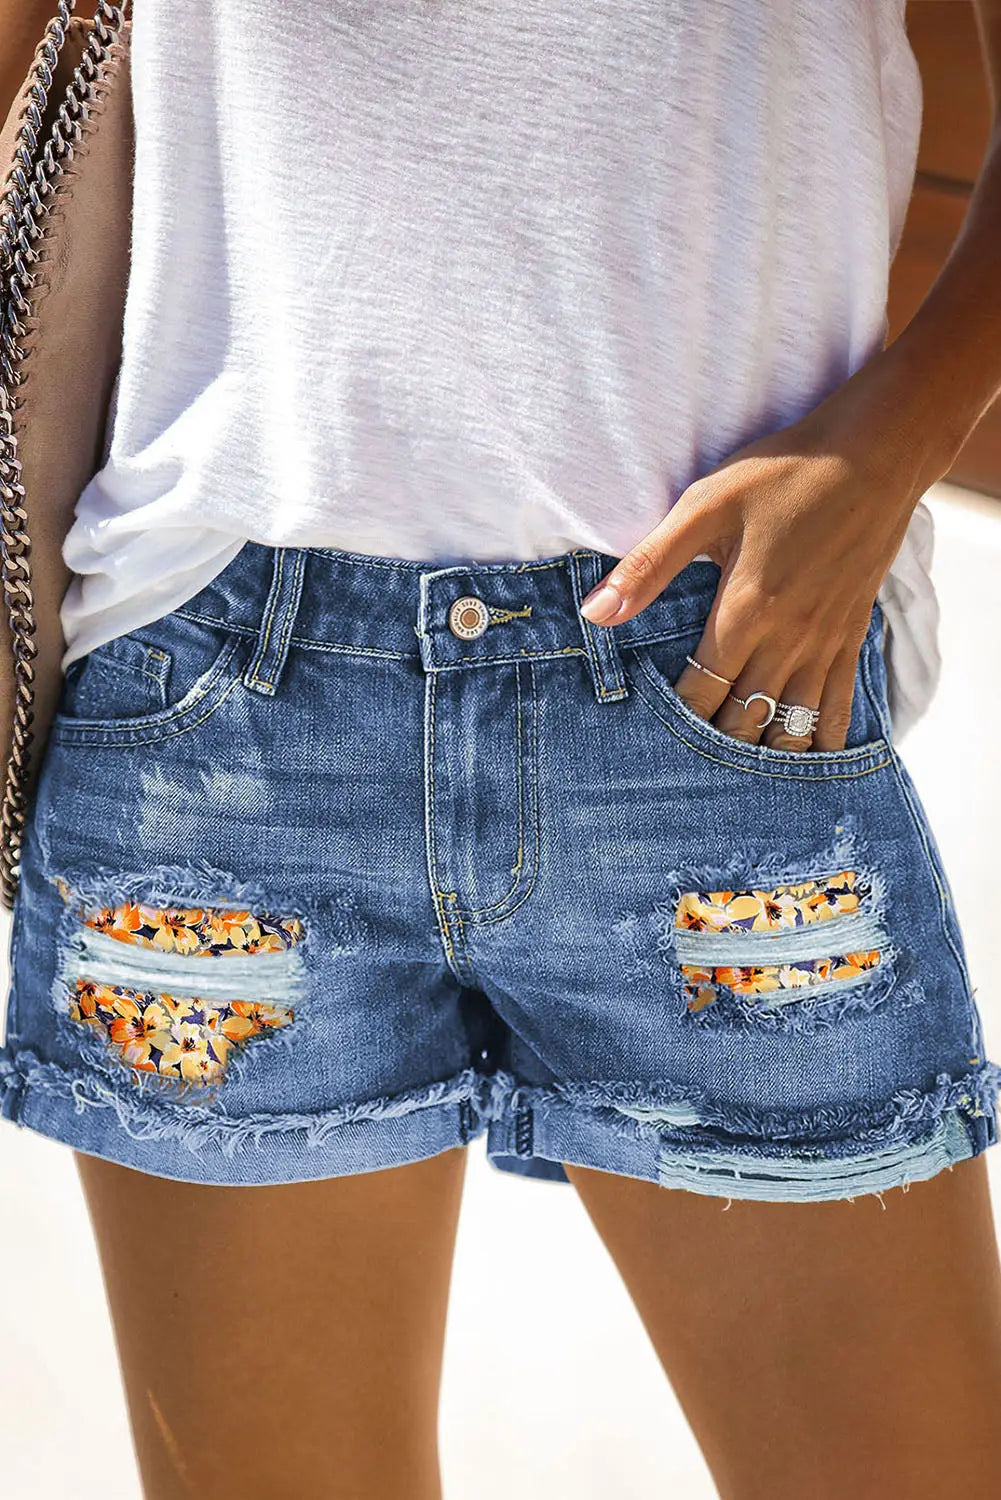 Floral rolled hem denim shorts - yellow / s / 71% cotton + 27.5% polyester + 1.5% spandex